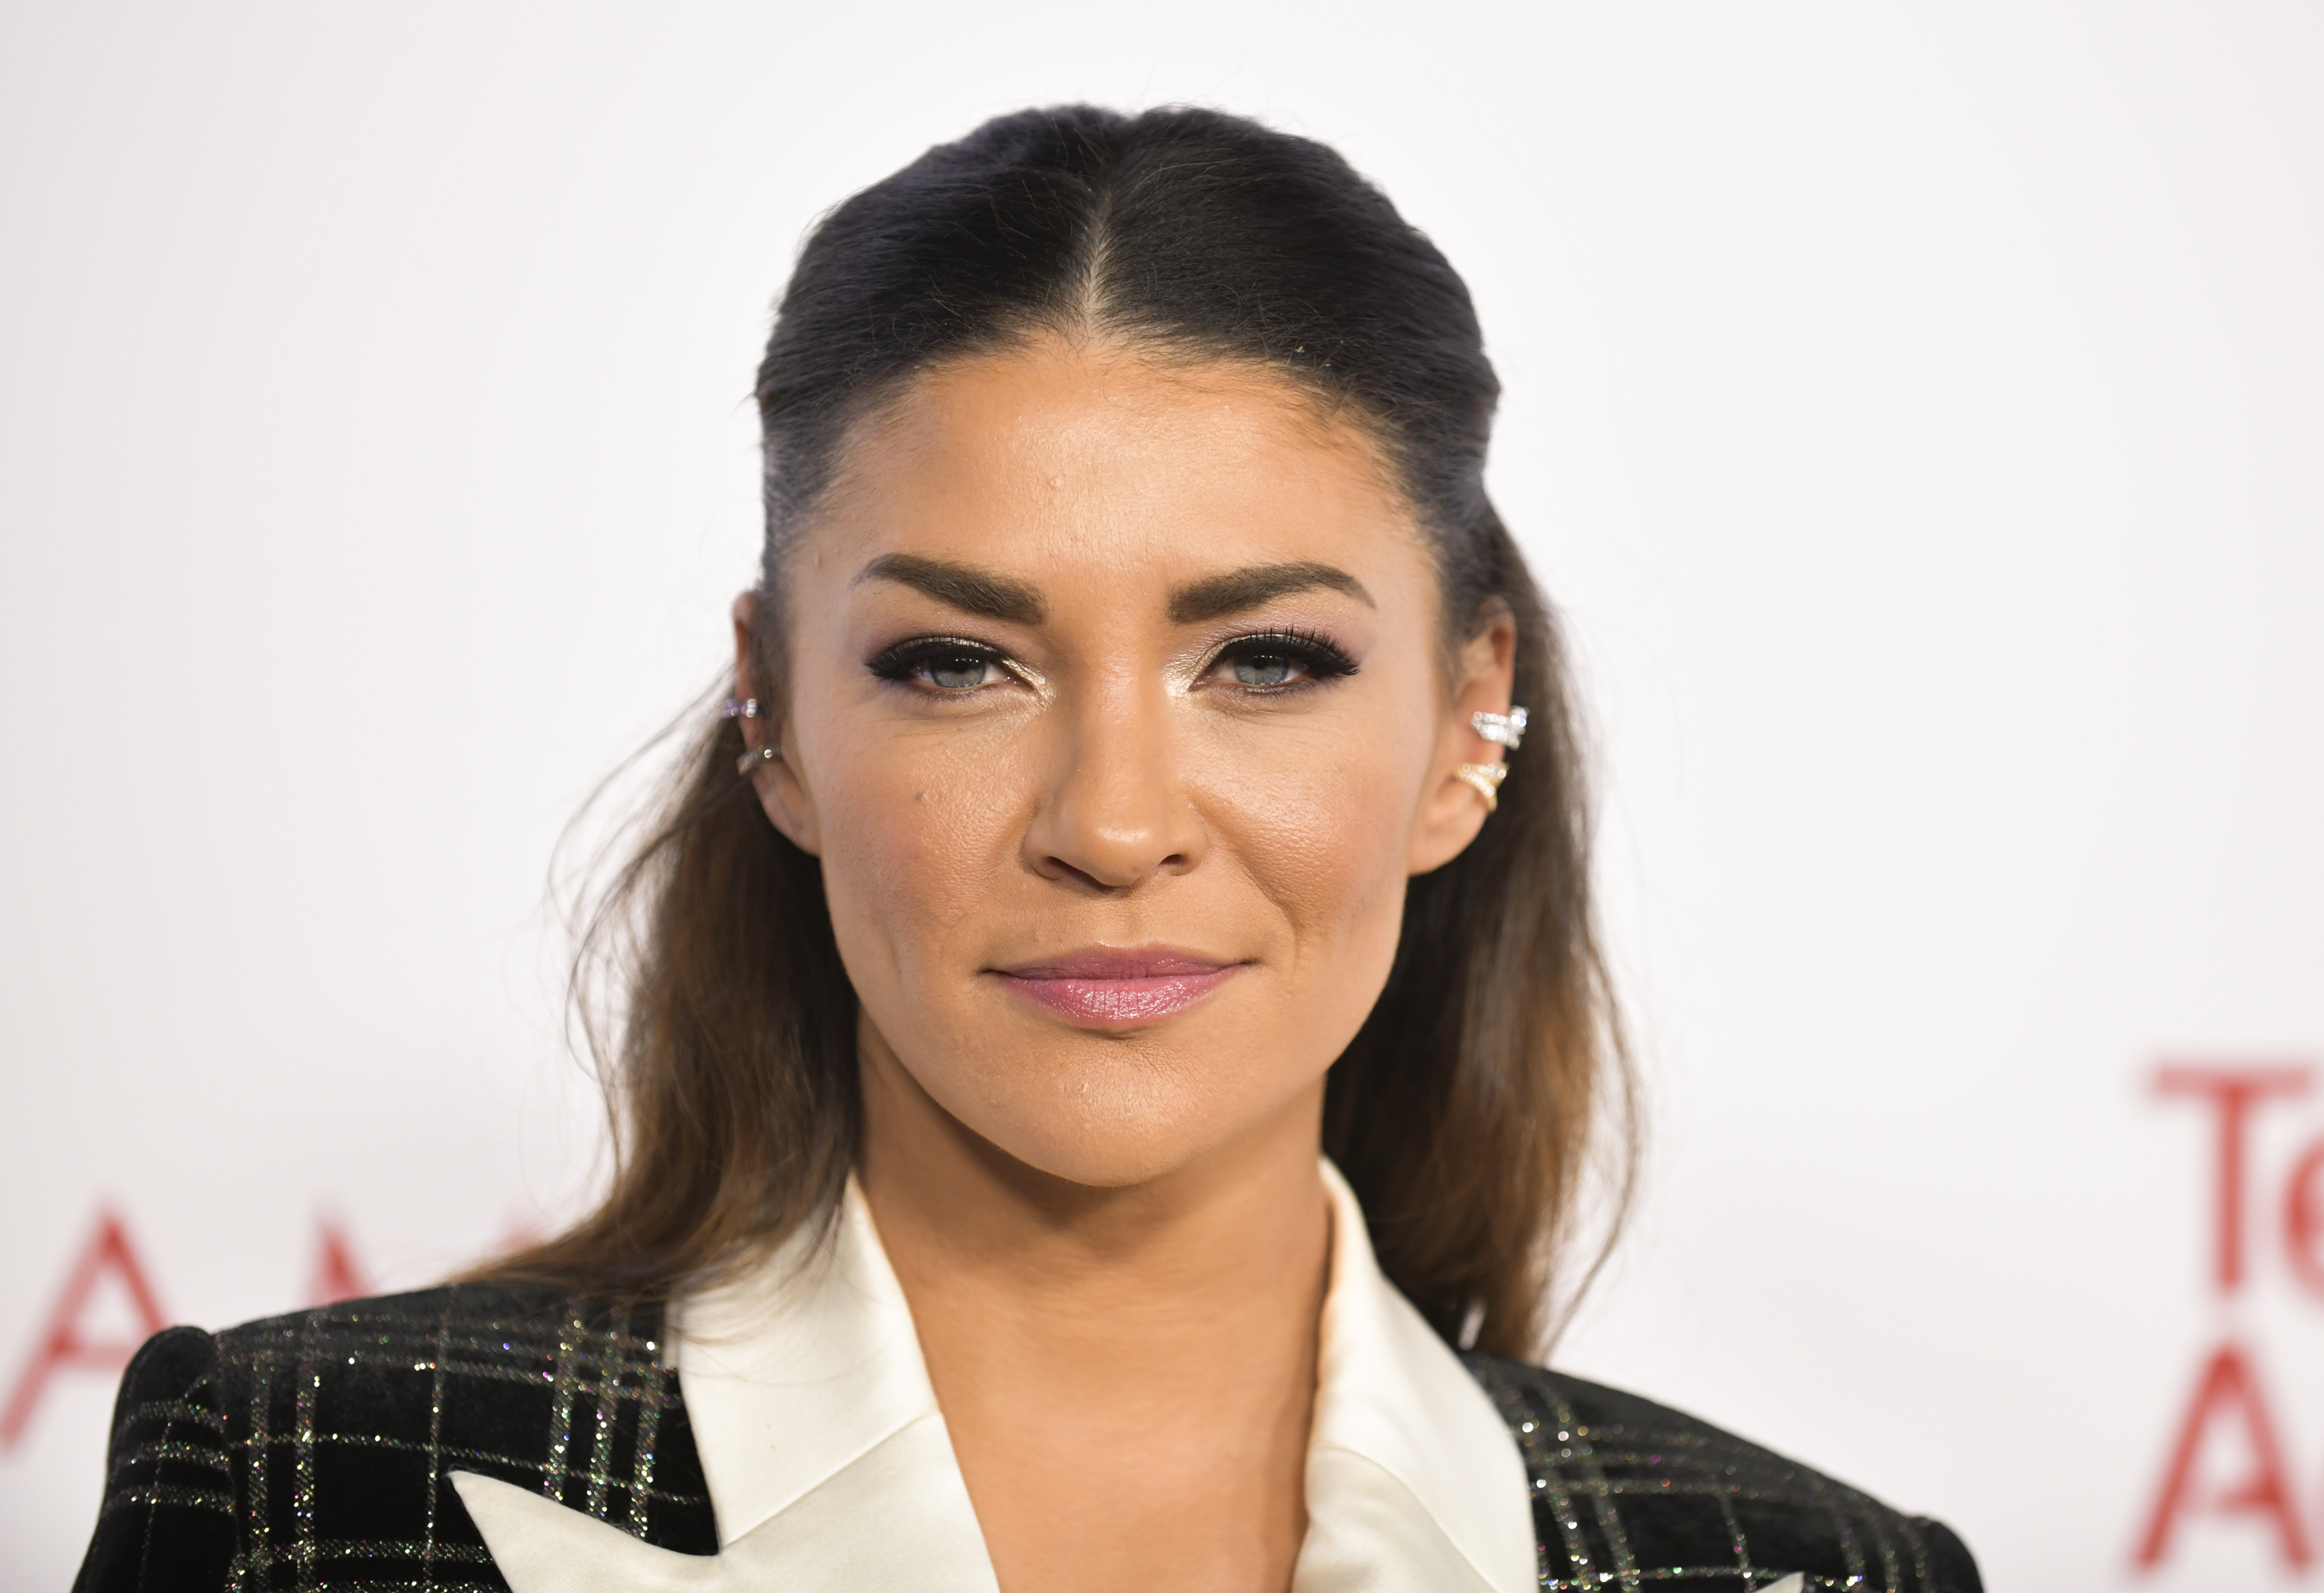 'Gossip Girl' star Jessica Szohr, who is the host of a rewatch podcast about the series